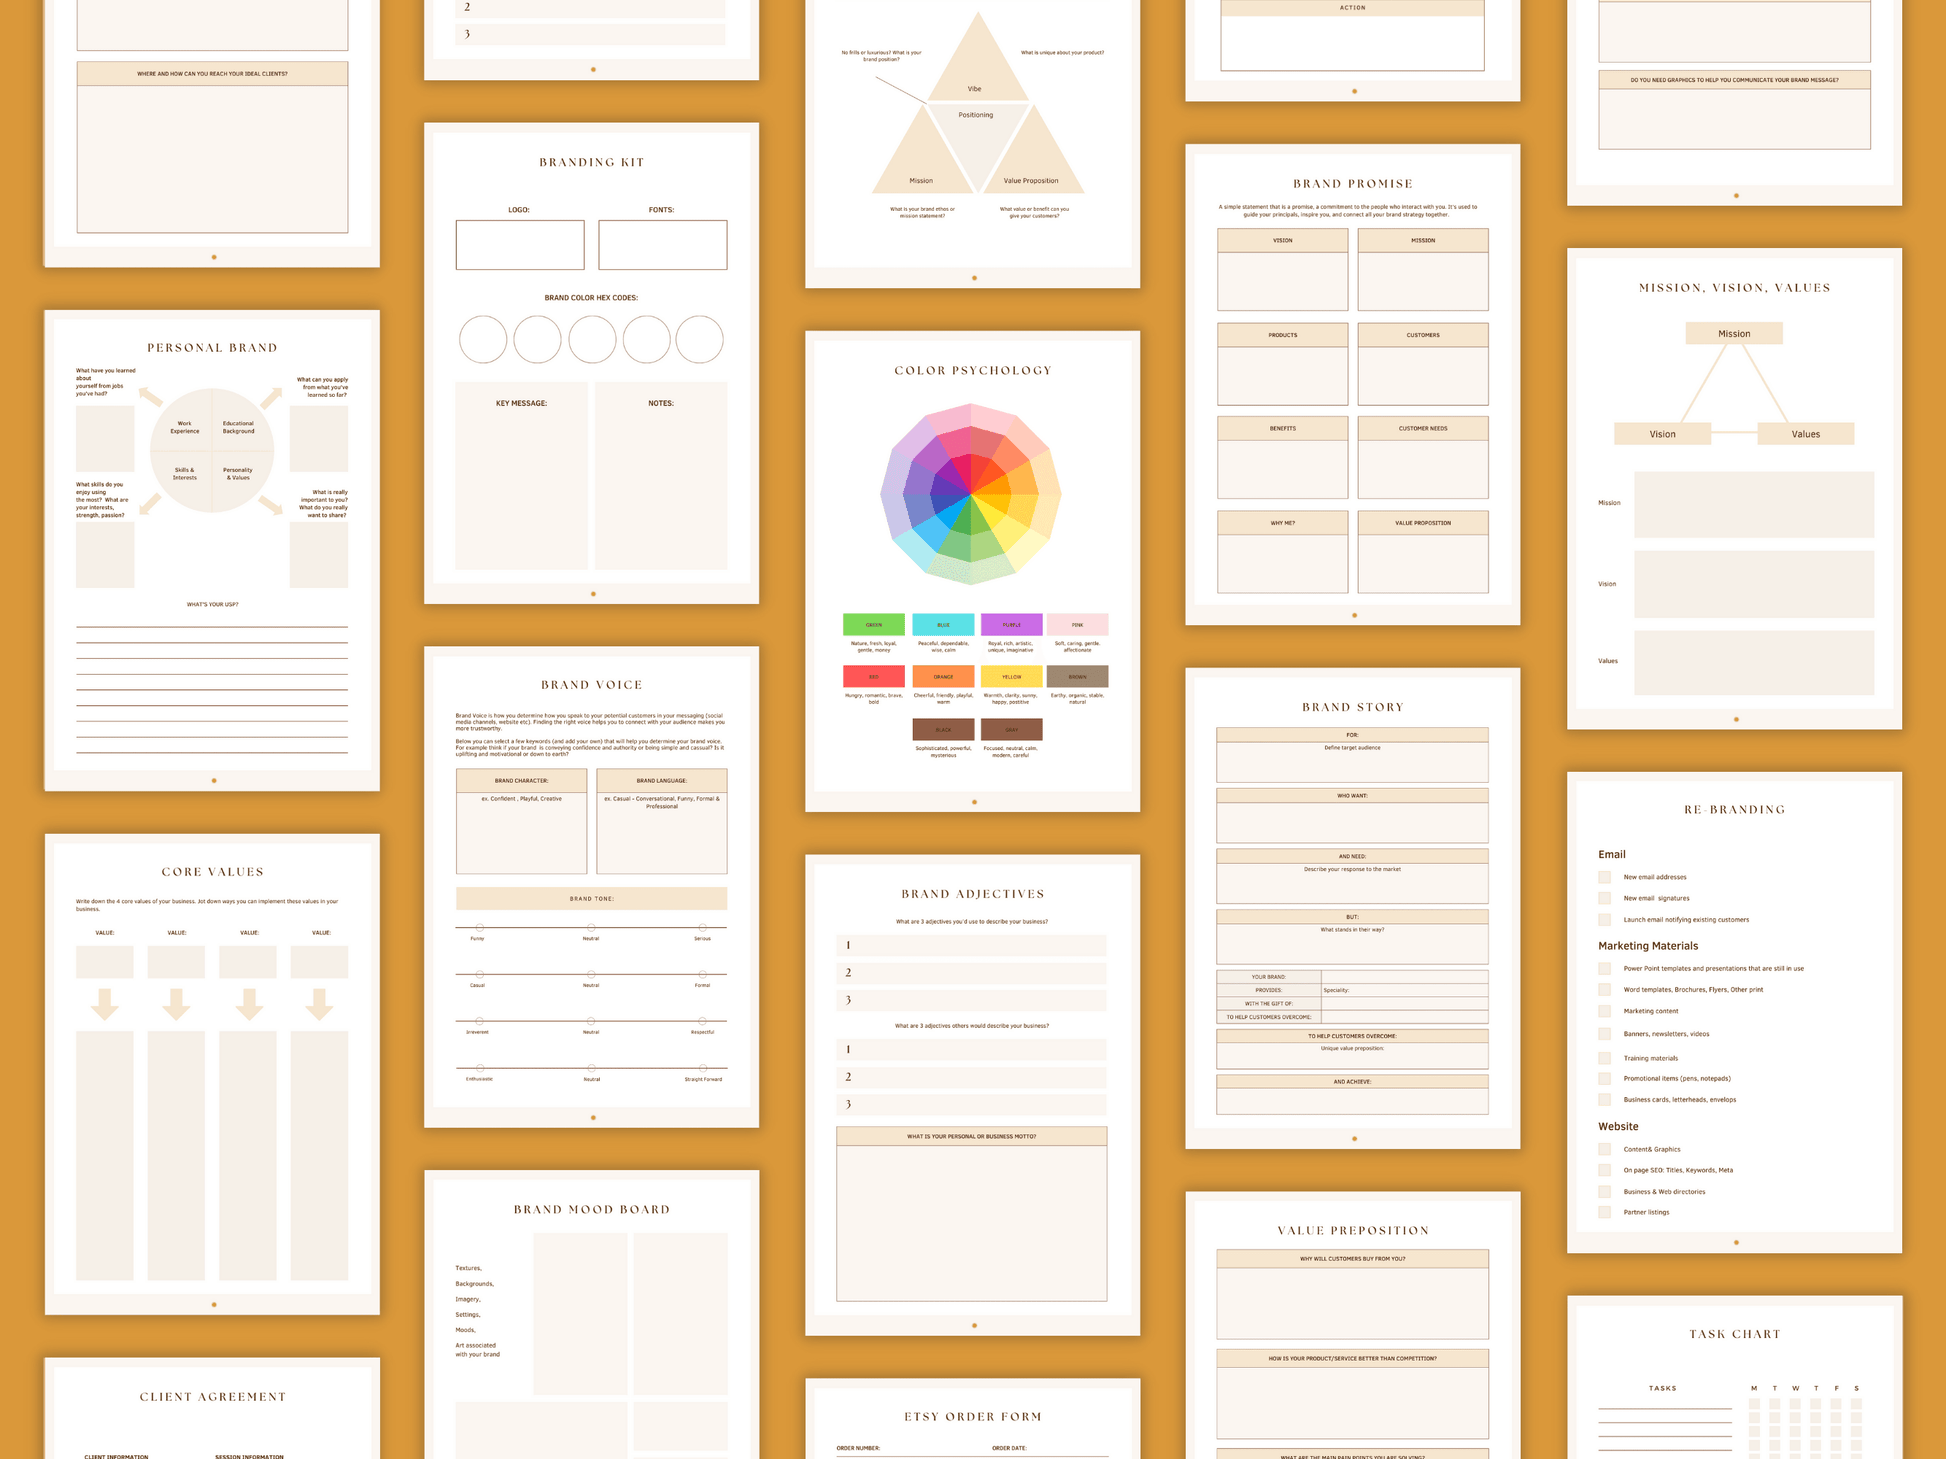 Aesthetic and boho branding done-for-you planner templates which include e.g. branding kit, brand adjective, brand mood board, etc. for content creators and business owners. It's editable in Canva.